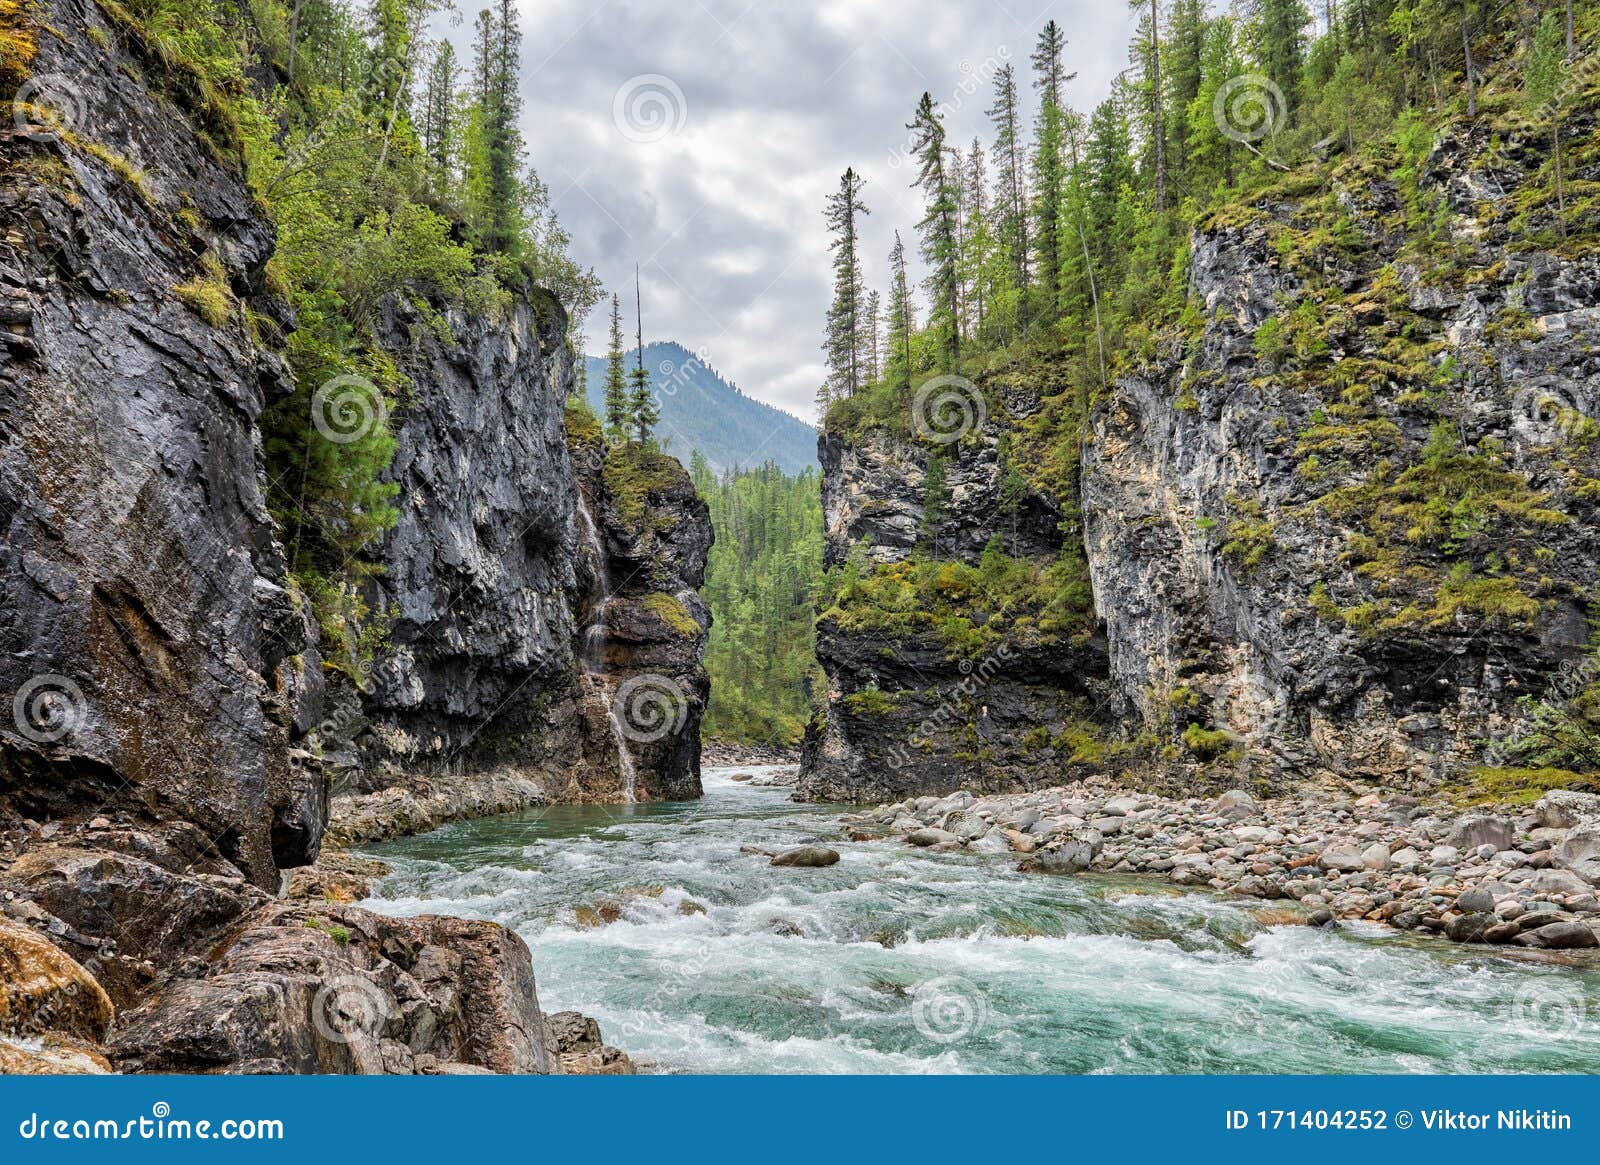 Rapid And Gorge Canyon Of Siberian Mountain Rivulet Stock Photo Image